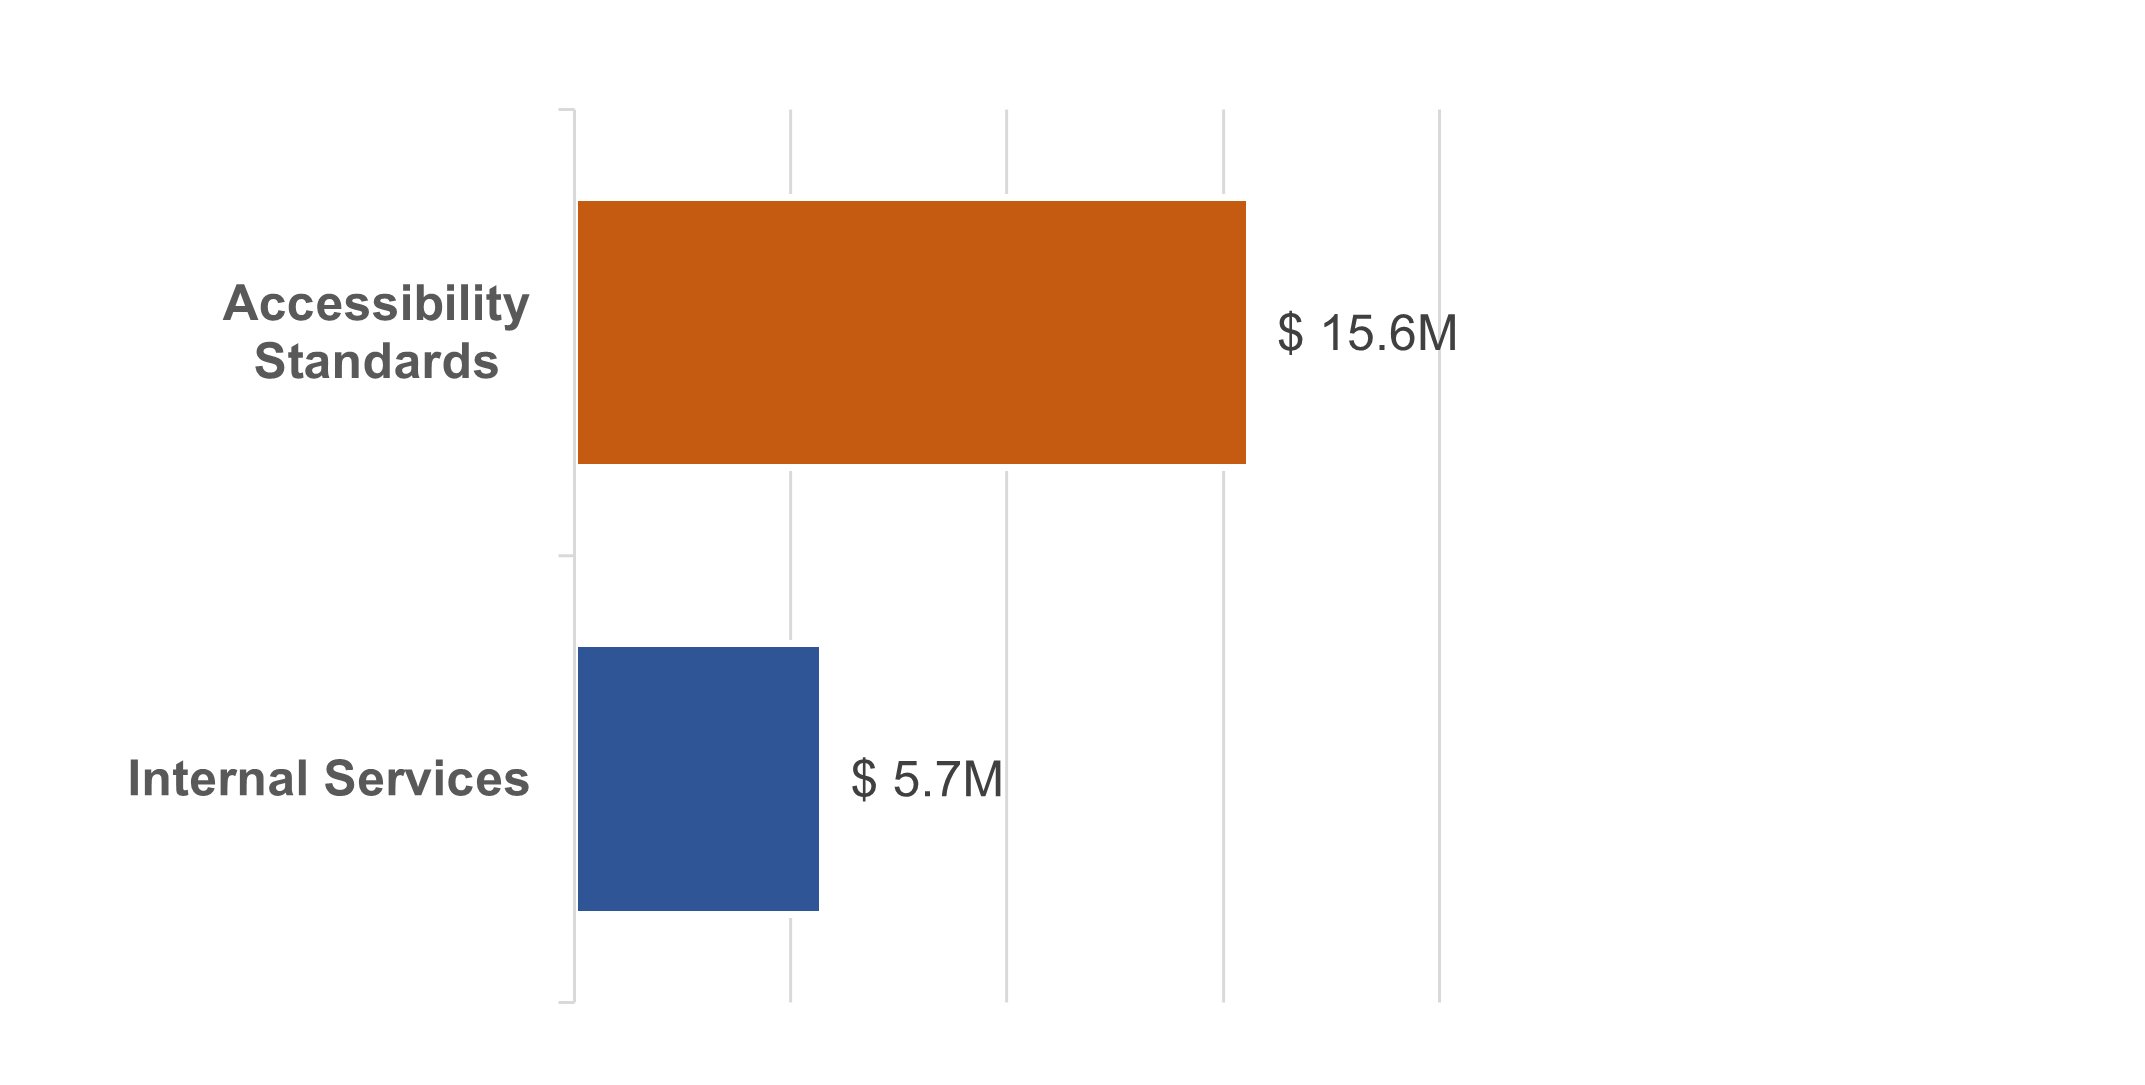 A bar chart showing departmental spending, indicating the anticipated amount of spending on the core responsibility and internal services for the fiscal year 2024 to 2025. The organization will spend $15.6M of its funding on accessibility standards and $5.7M on internal services.